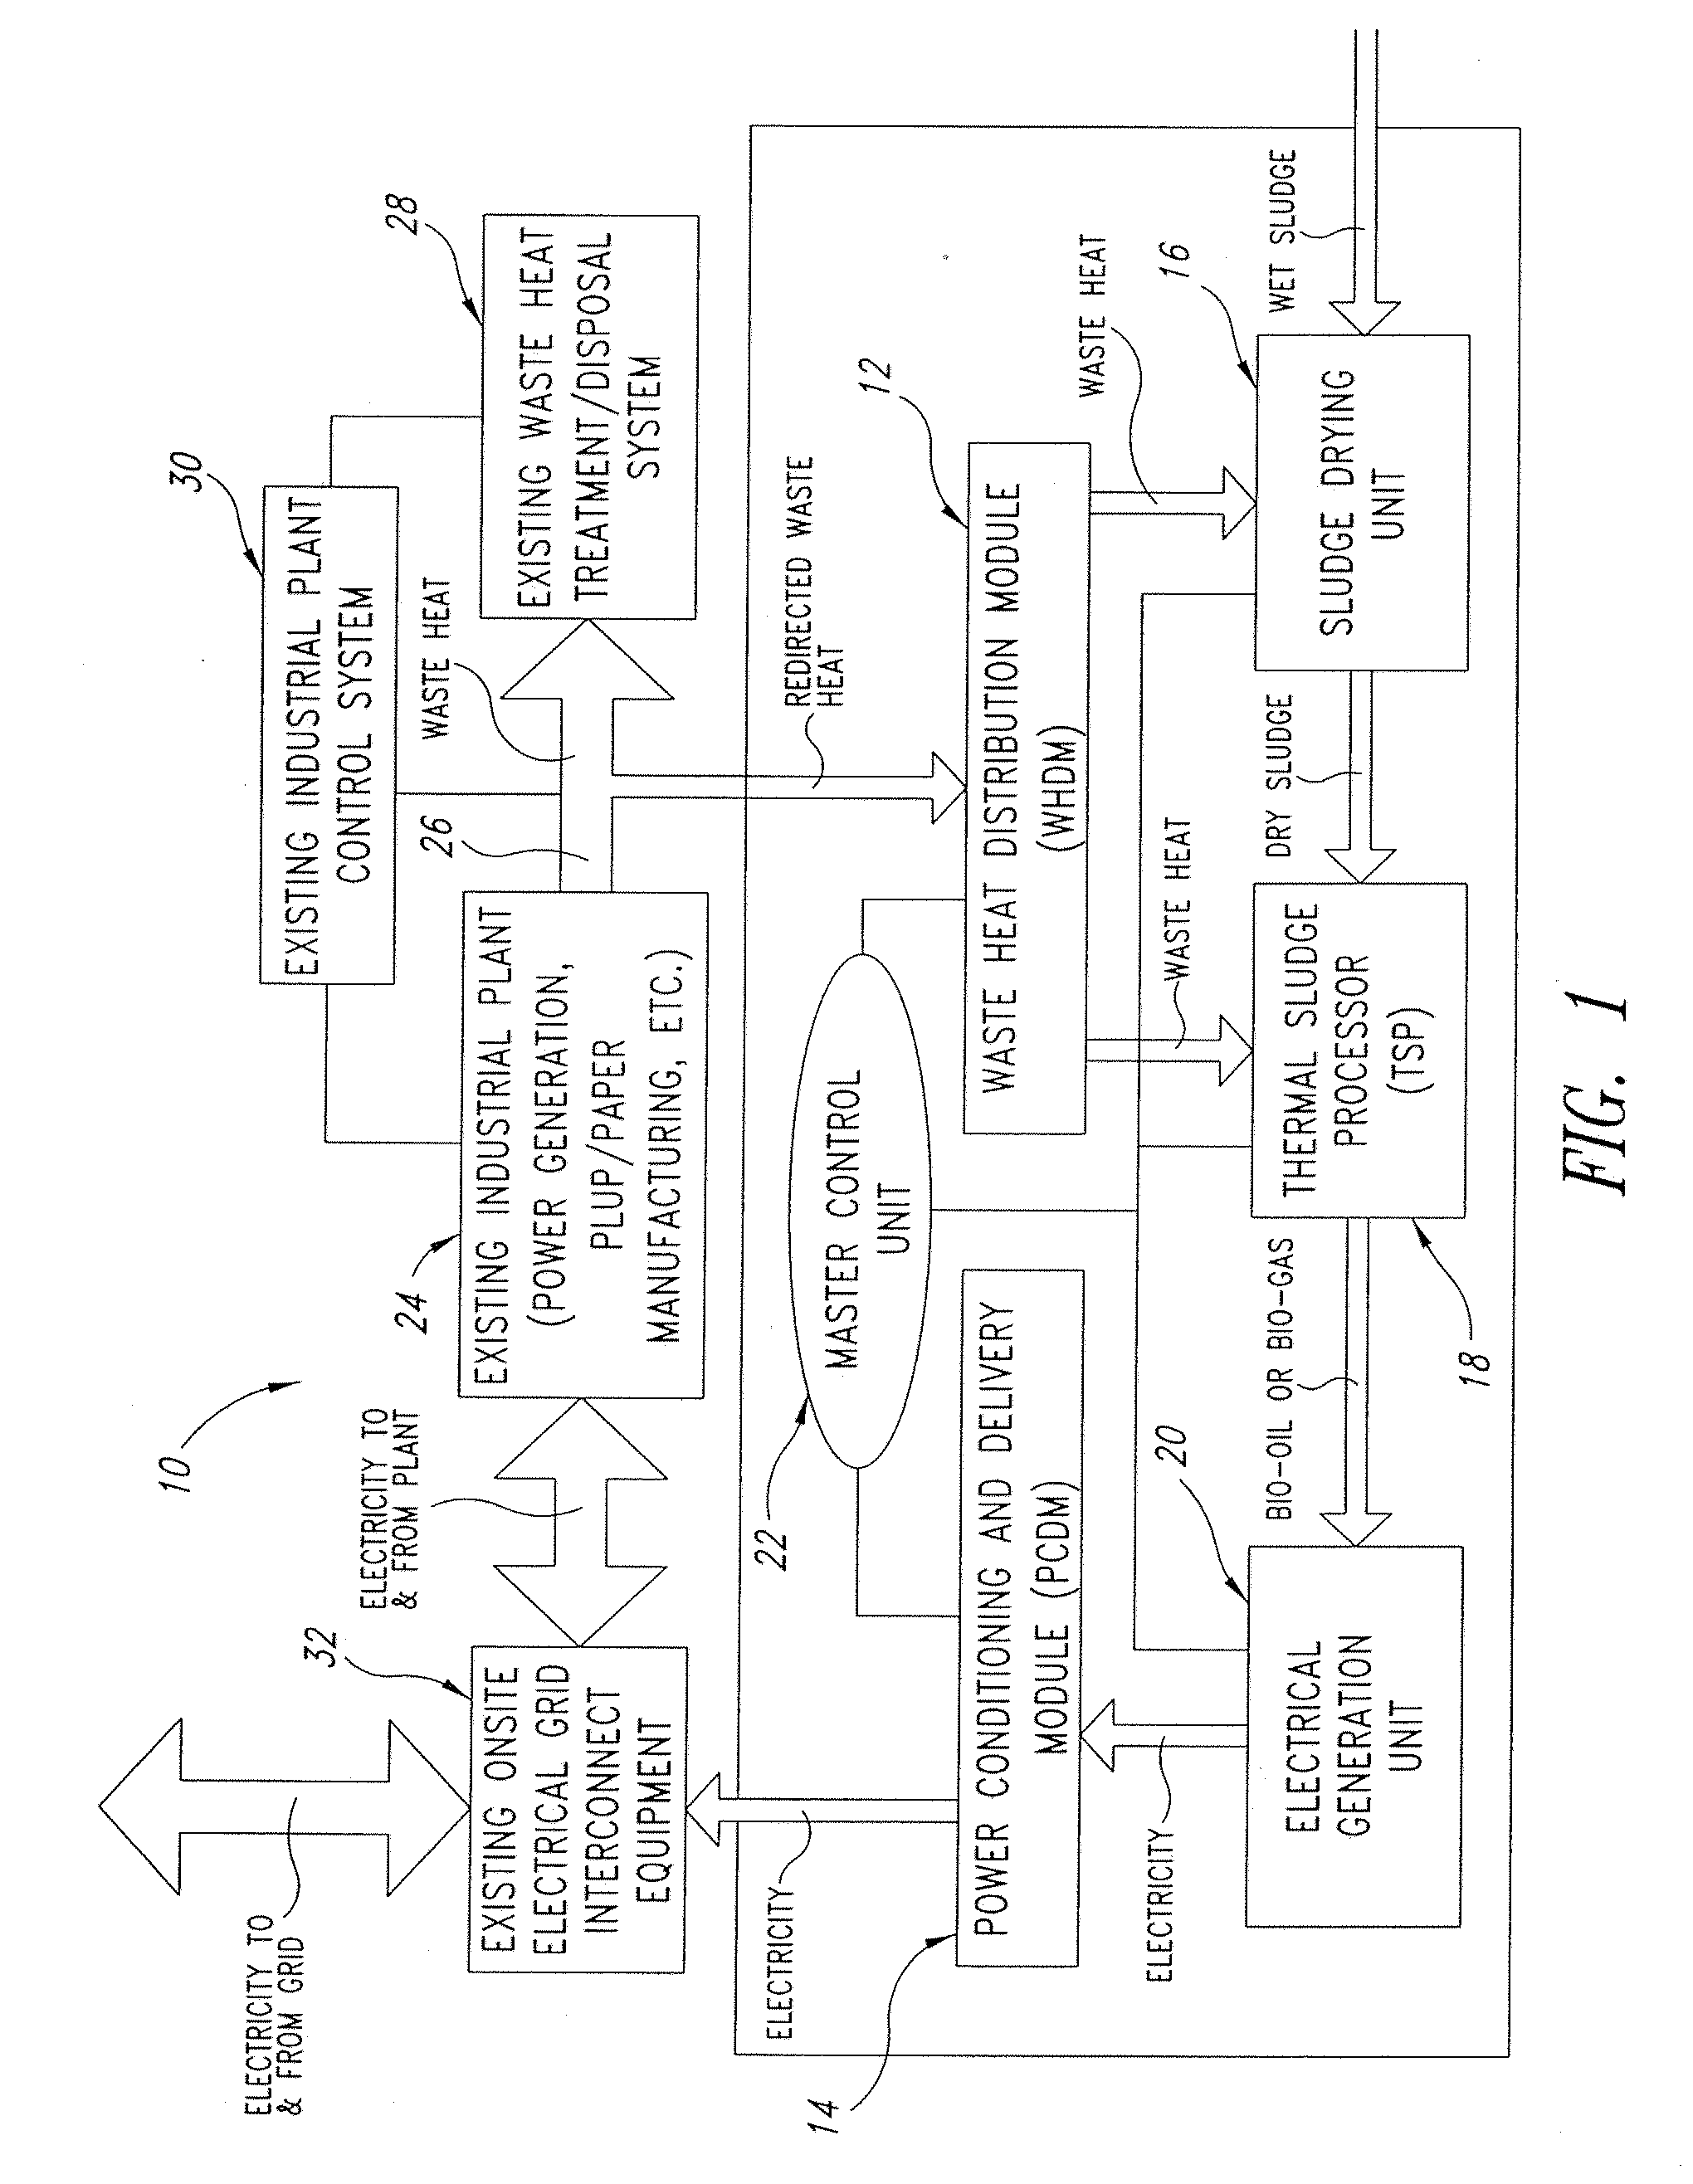 Systems and Methods for Utilization of Waste Heat for Sludge Treatment and Energy Generation